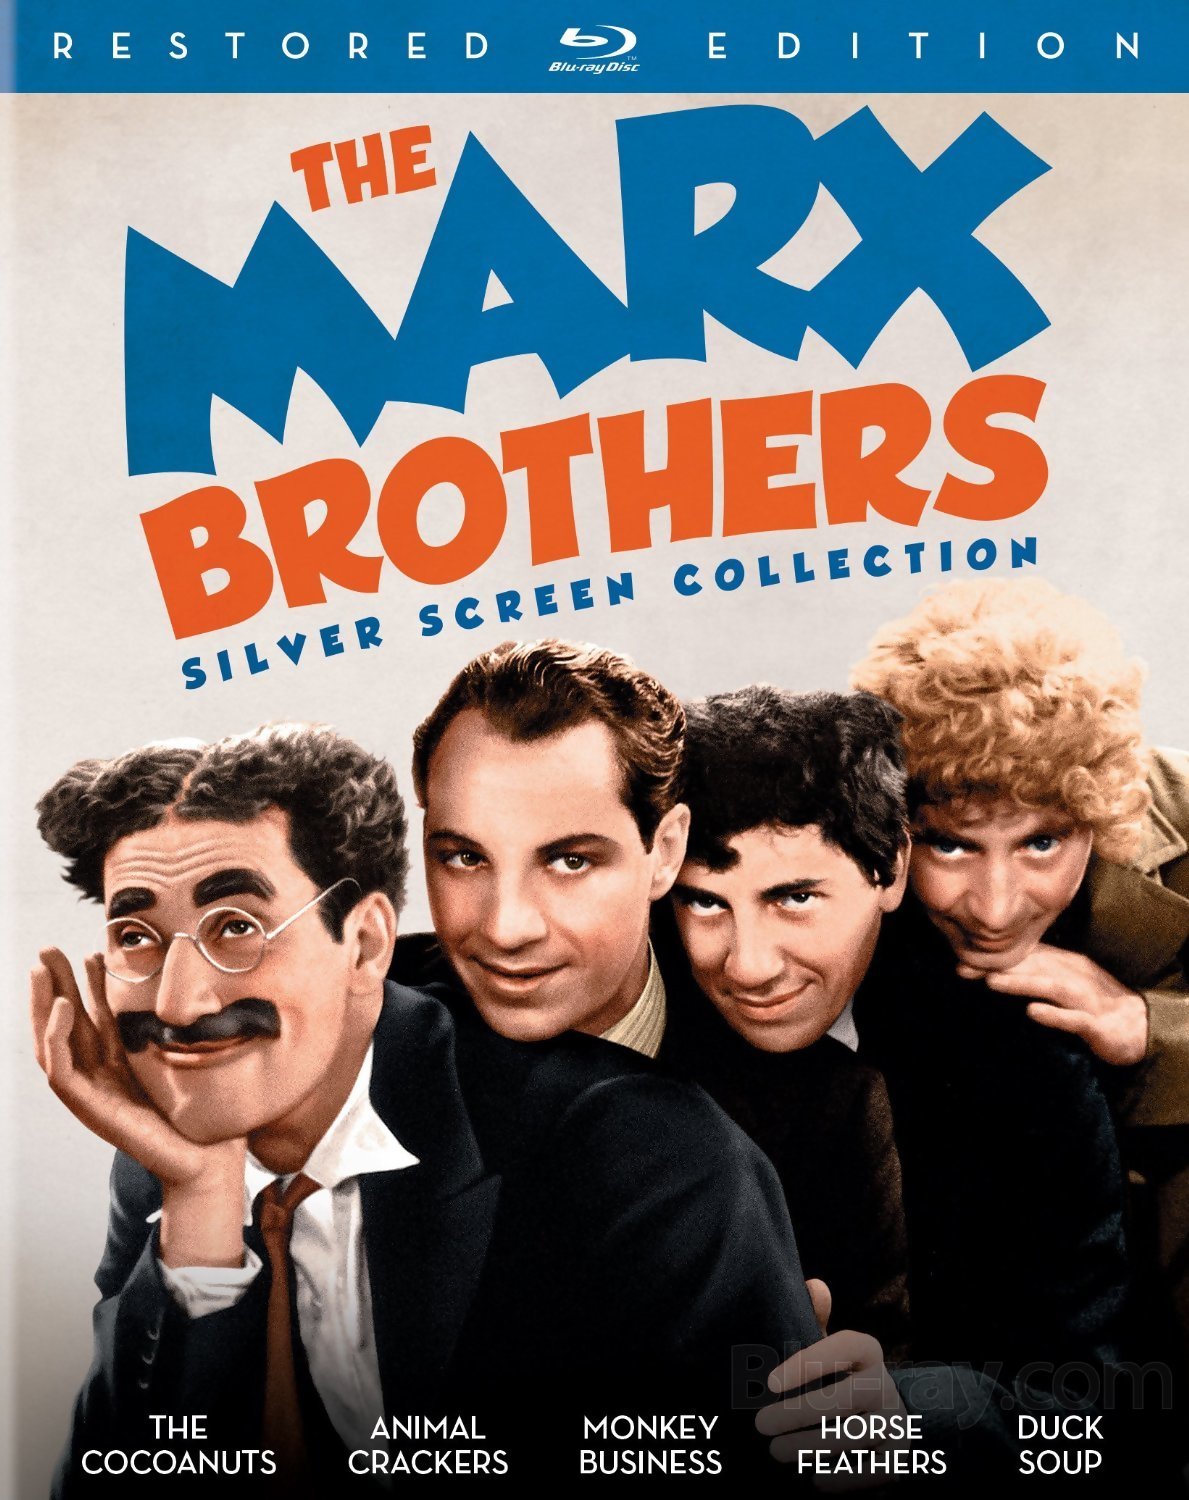 THE MARX BROTHERS SILVER SCREEN COLLECTION Blu-ray